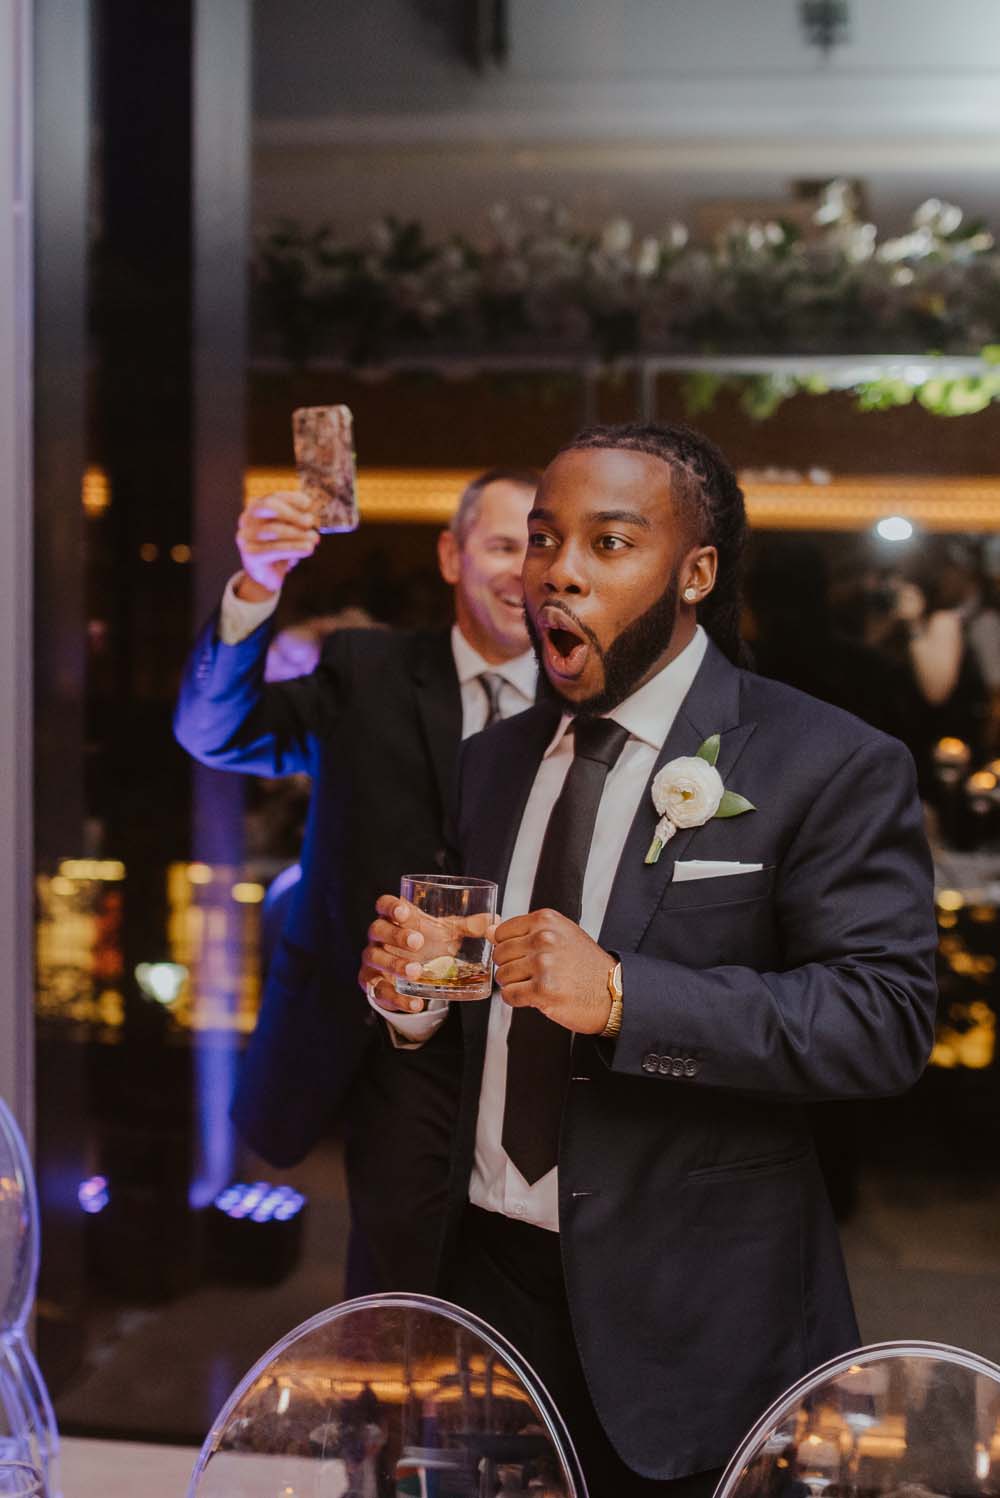 An Opulent Wedding At The Royal Conservatory Of Music - groomsmen